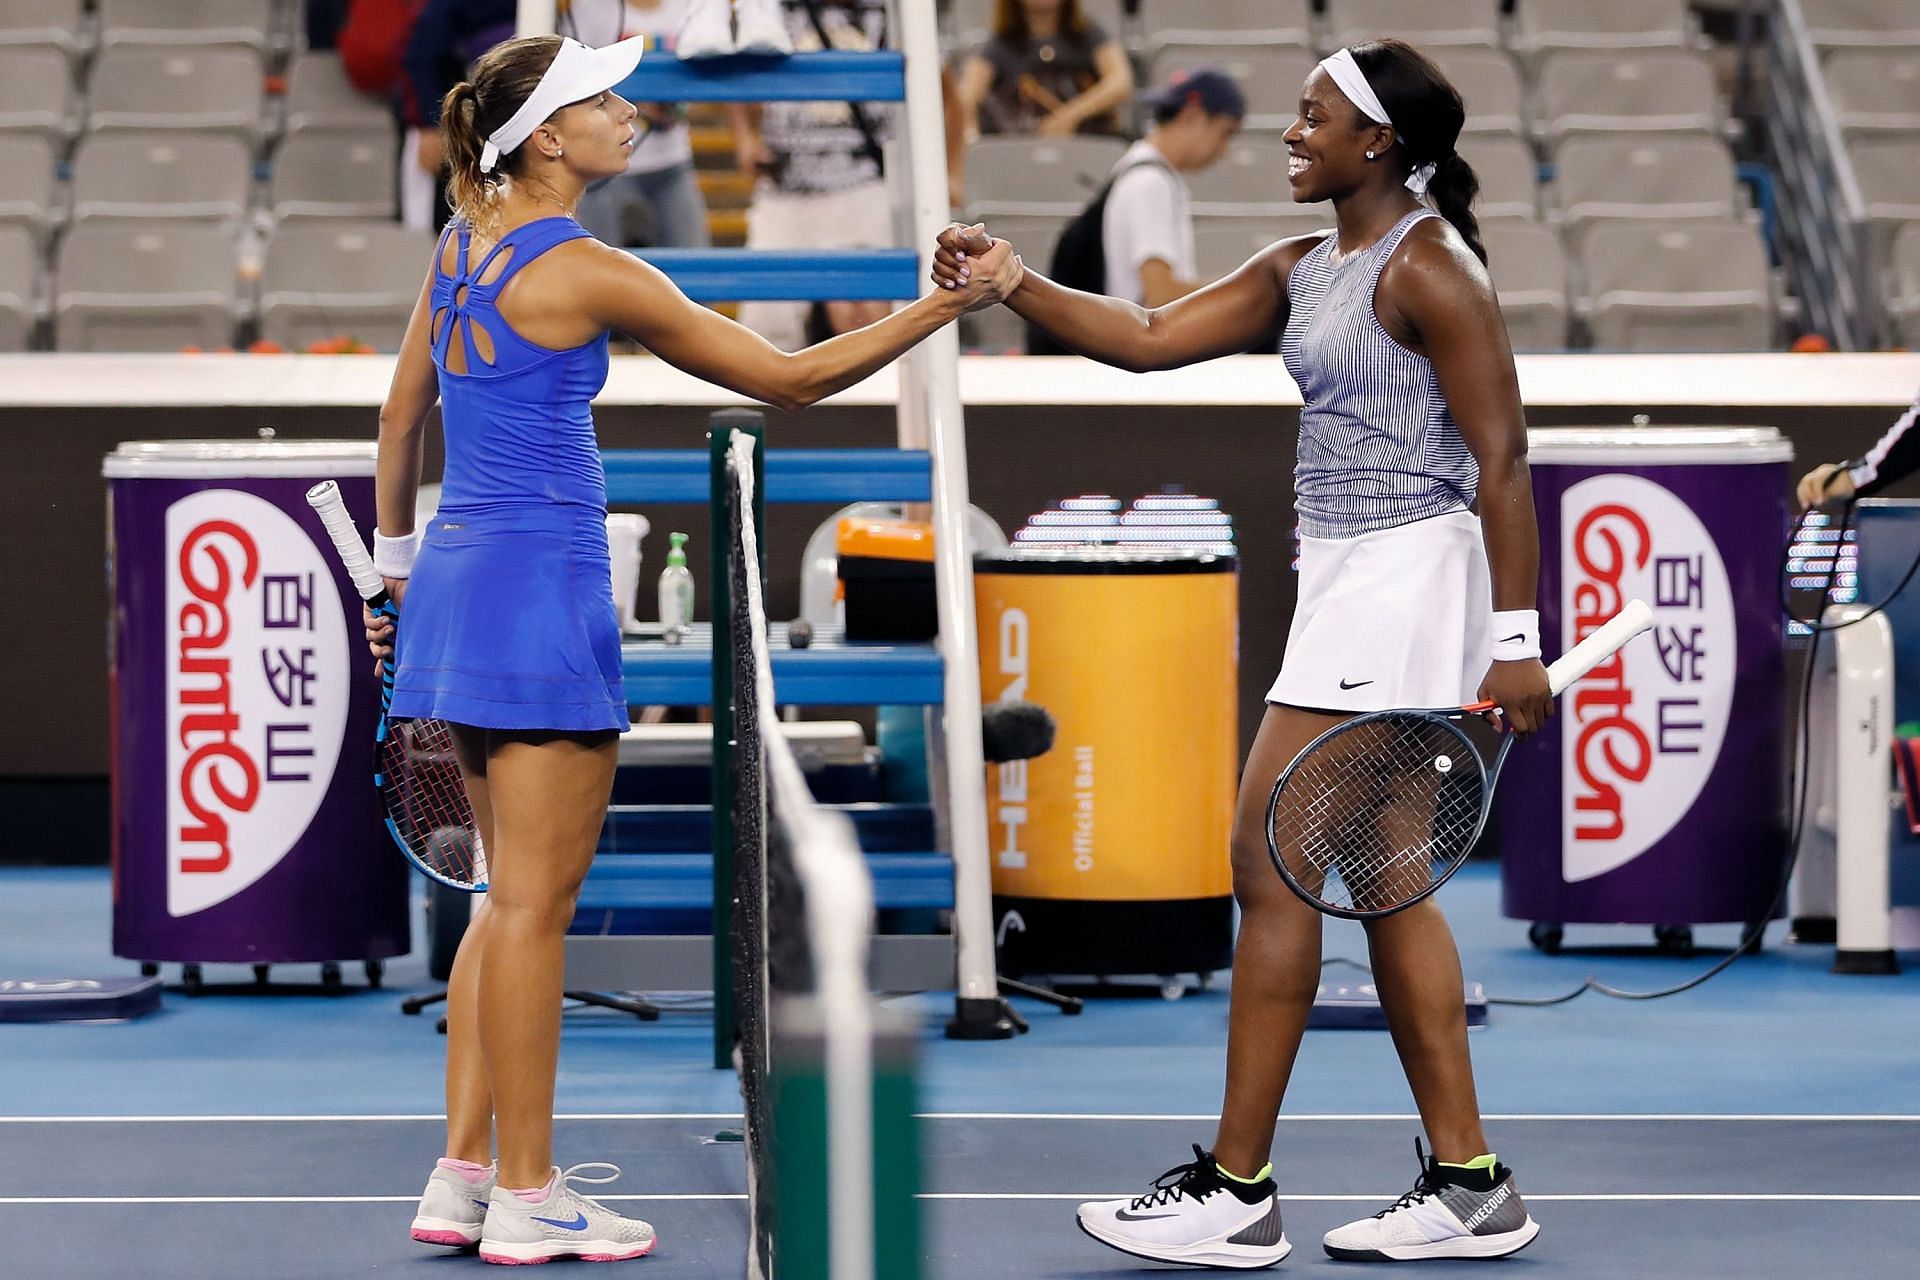 Sloane Stephens and Magda Linette will face off for the fourth time on Sunday